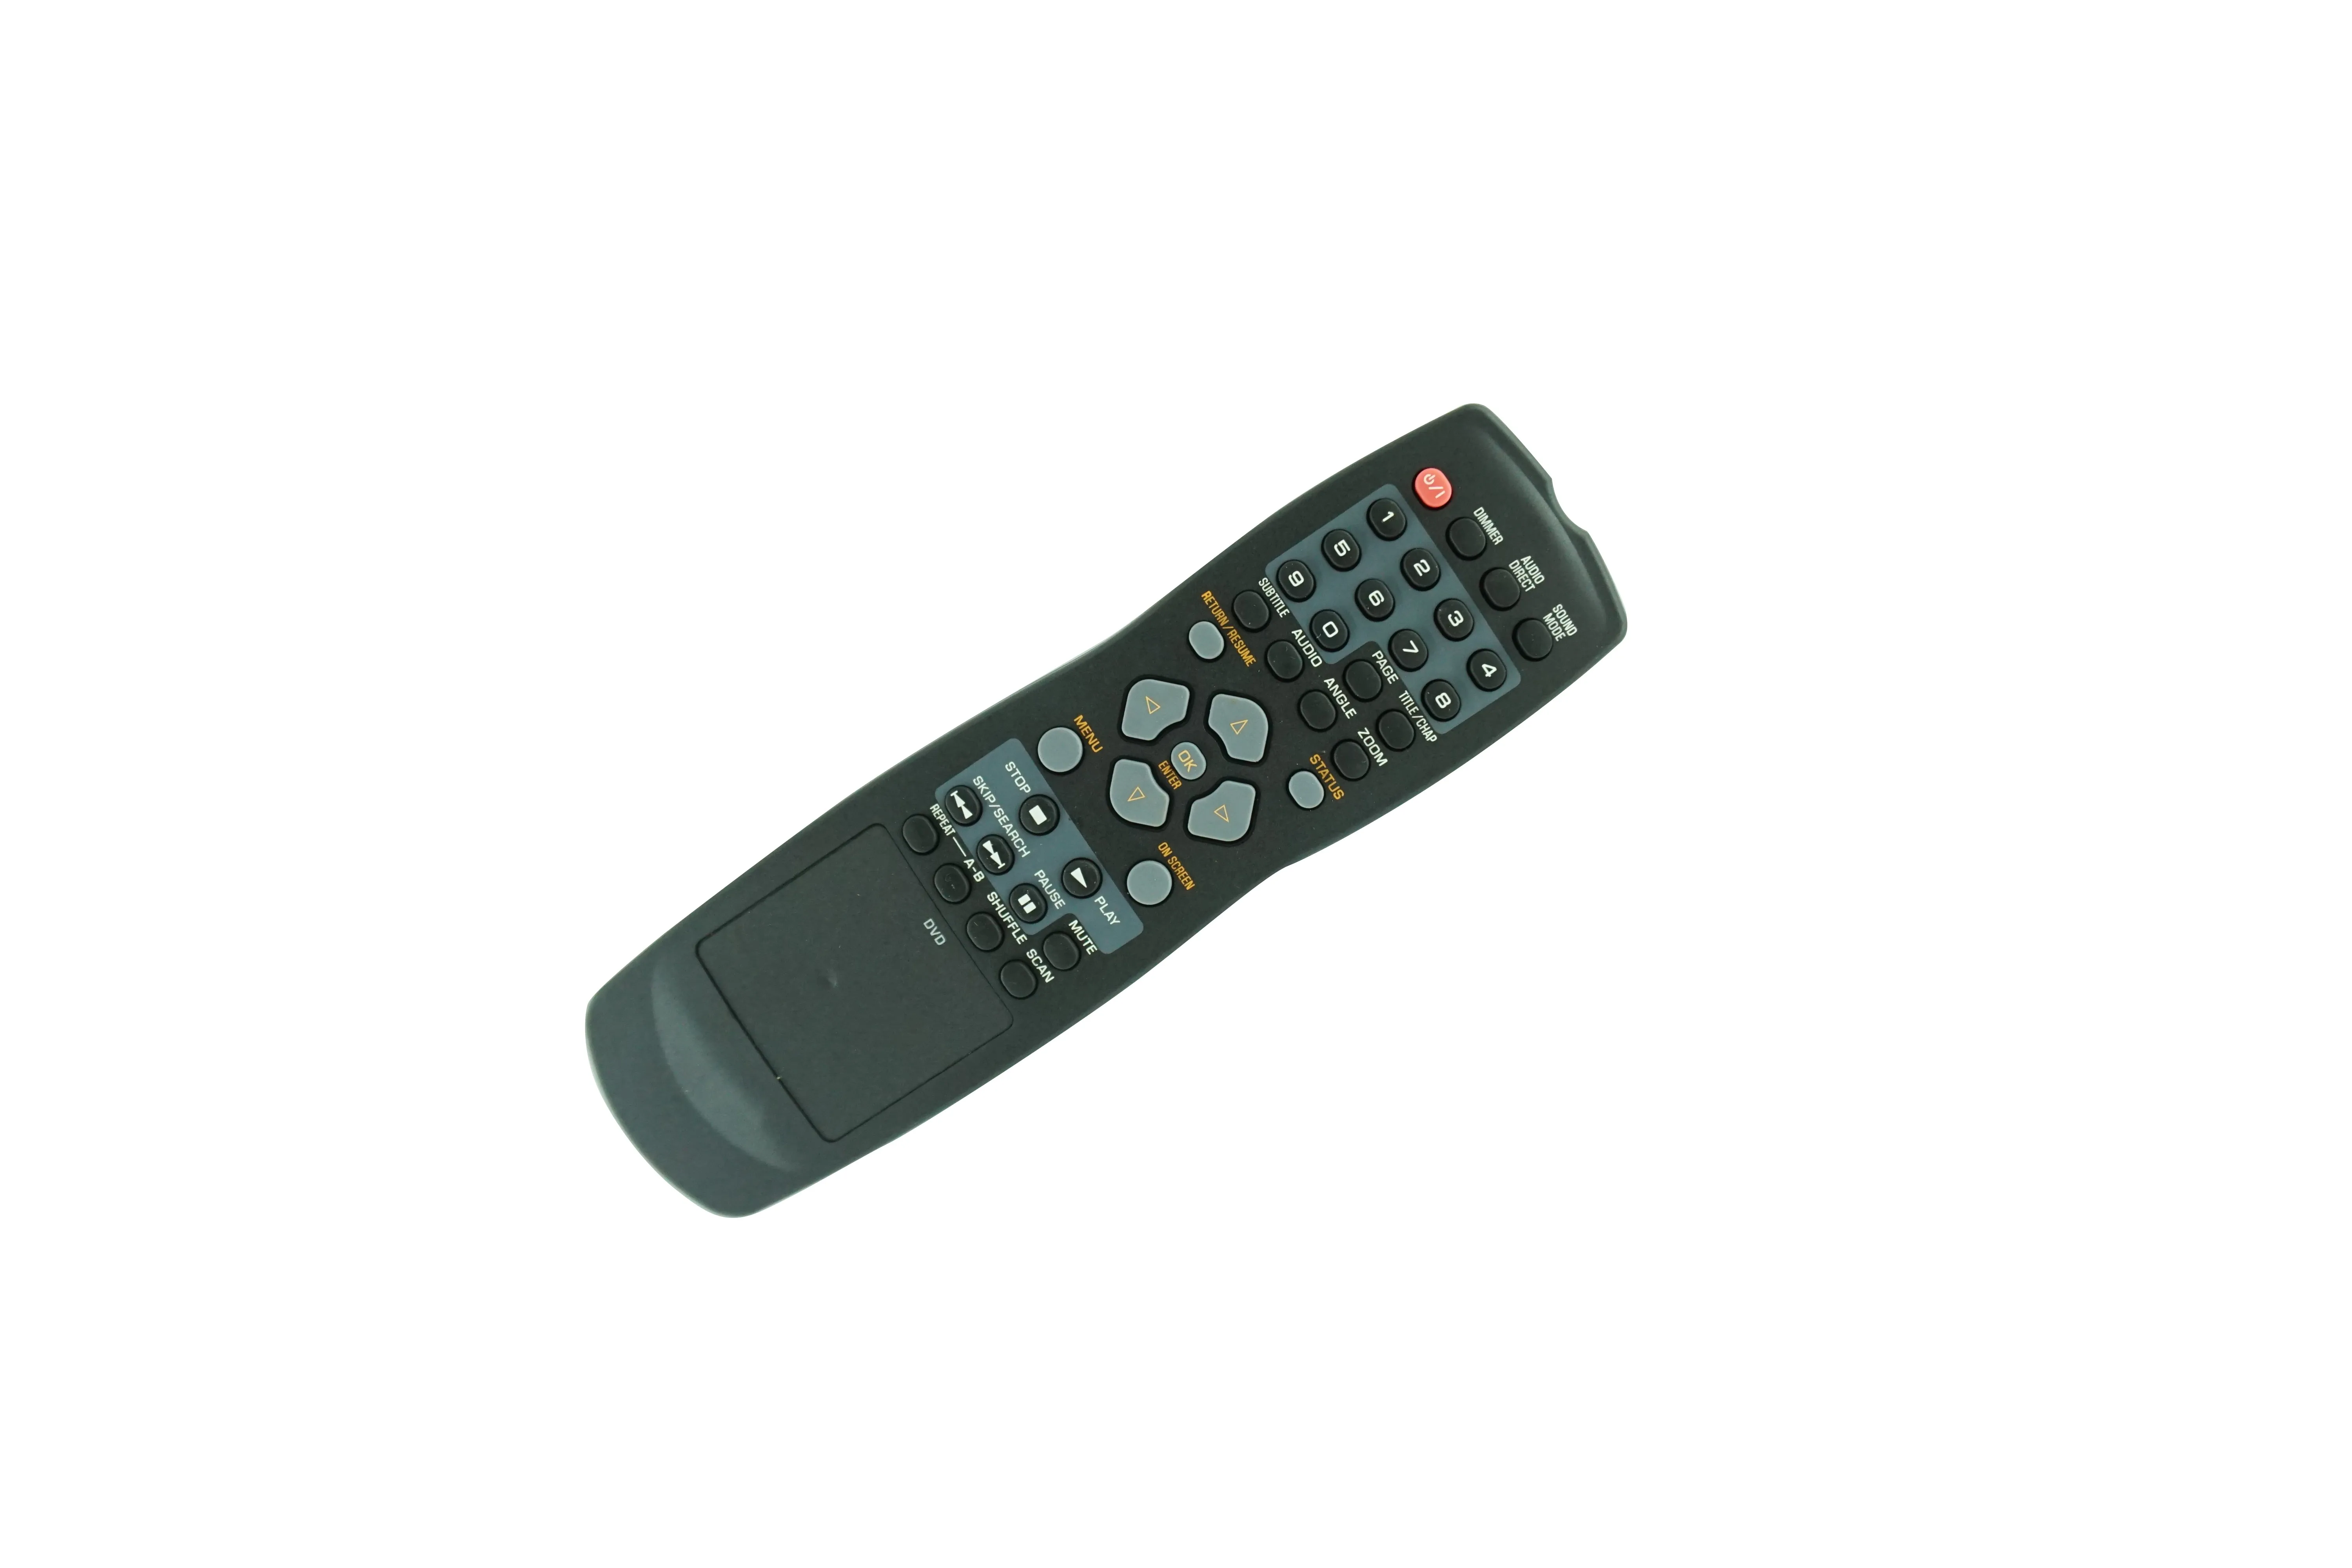 peak Seaport Funny Remote Control For Yamaha DVD S530 DVD S520B DVD S540 DV S5450 DV S5550N  RC19133010/00H DVD E600 DVD Audio/Video SA CD Player|Remote Controls| -  AliExpress